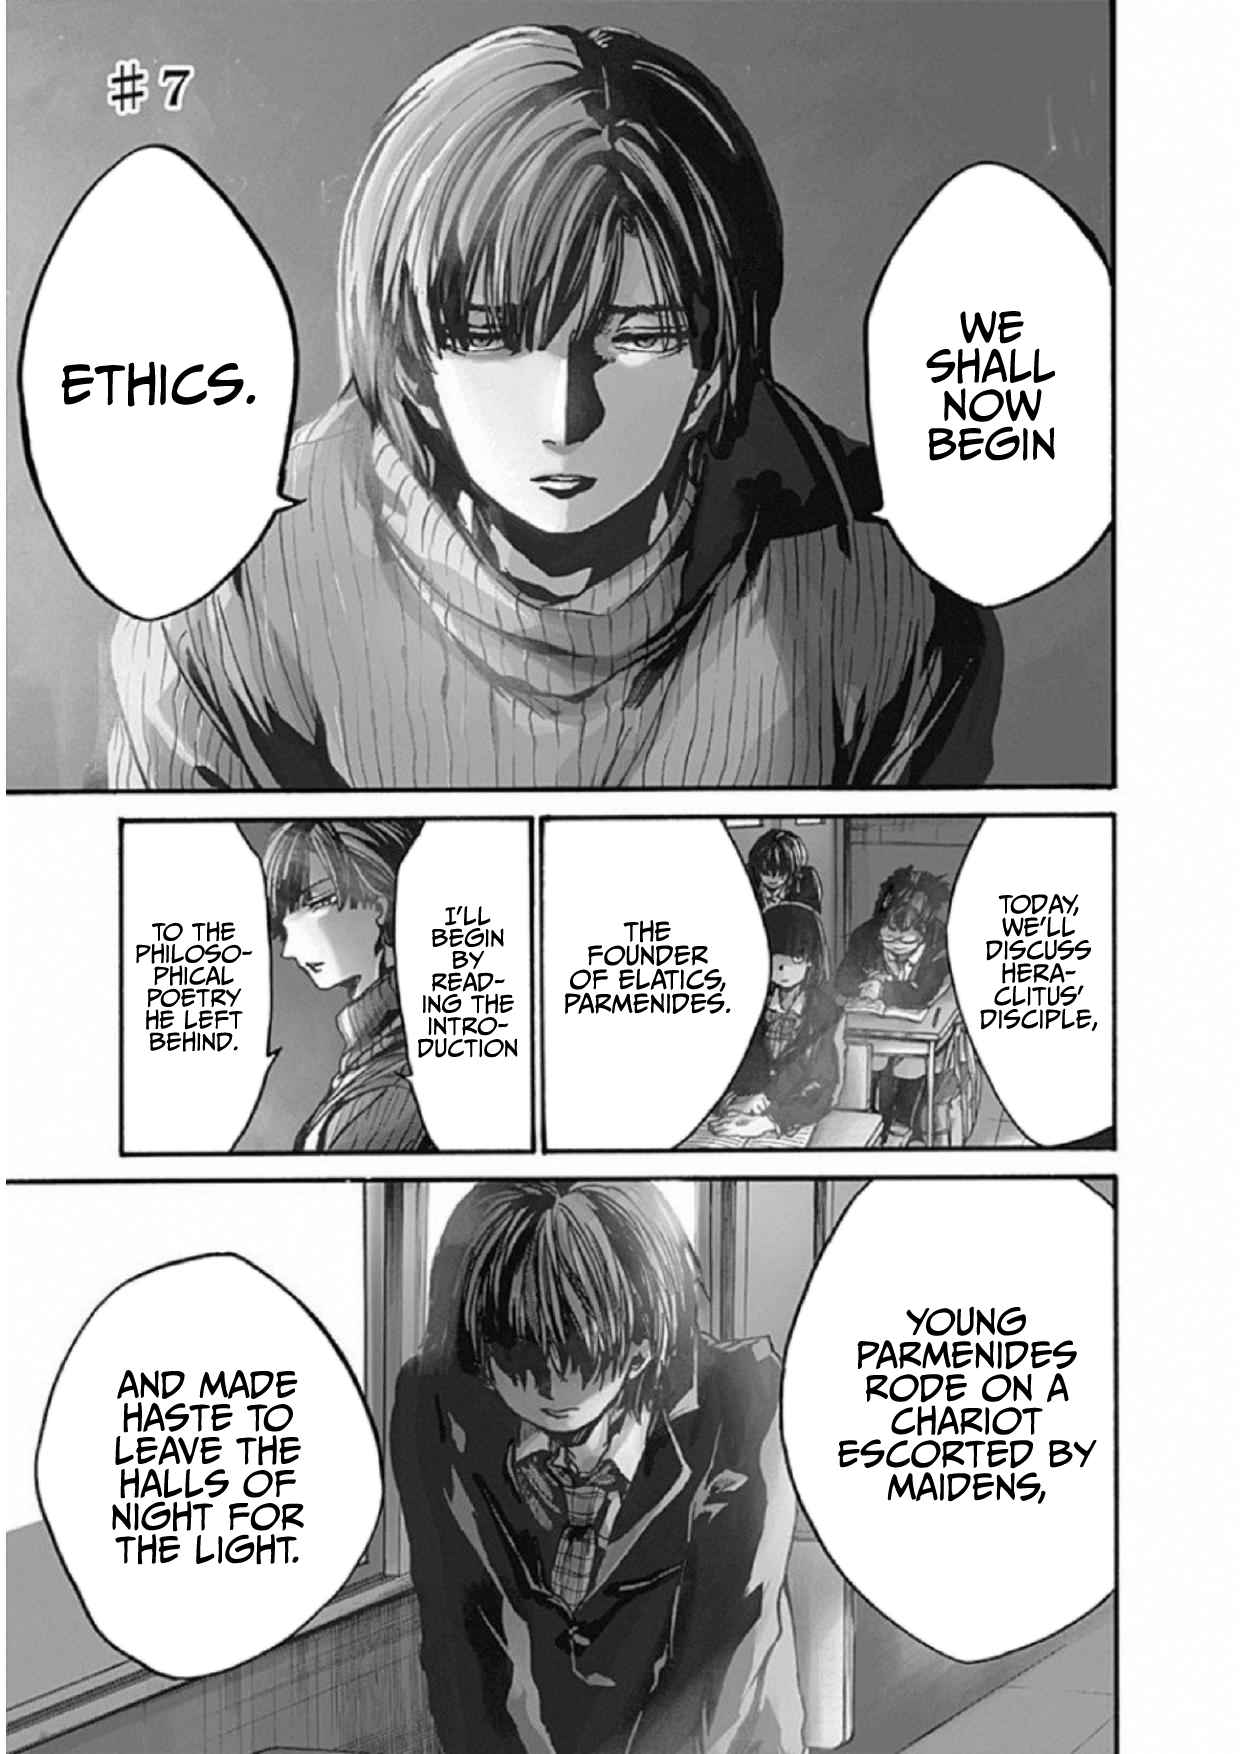 We Shall Now Begin Ethics Vol. 2 Ch. 7 The Qualities of a Teacher